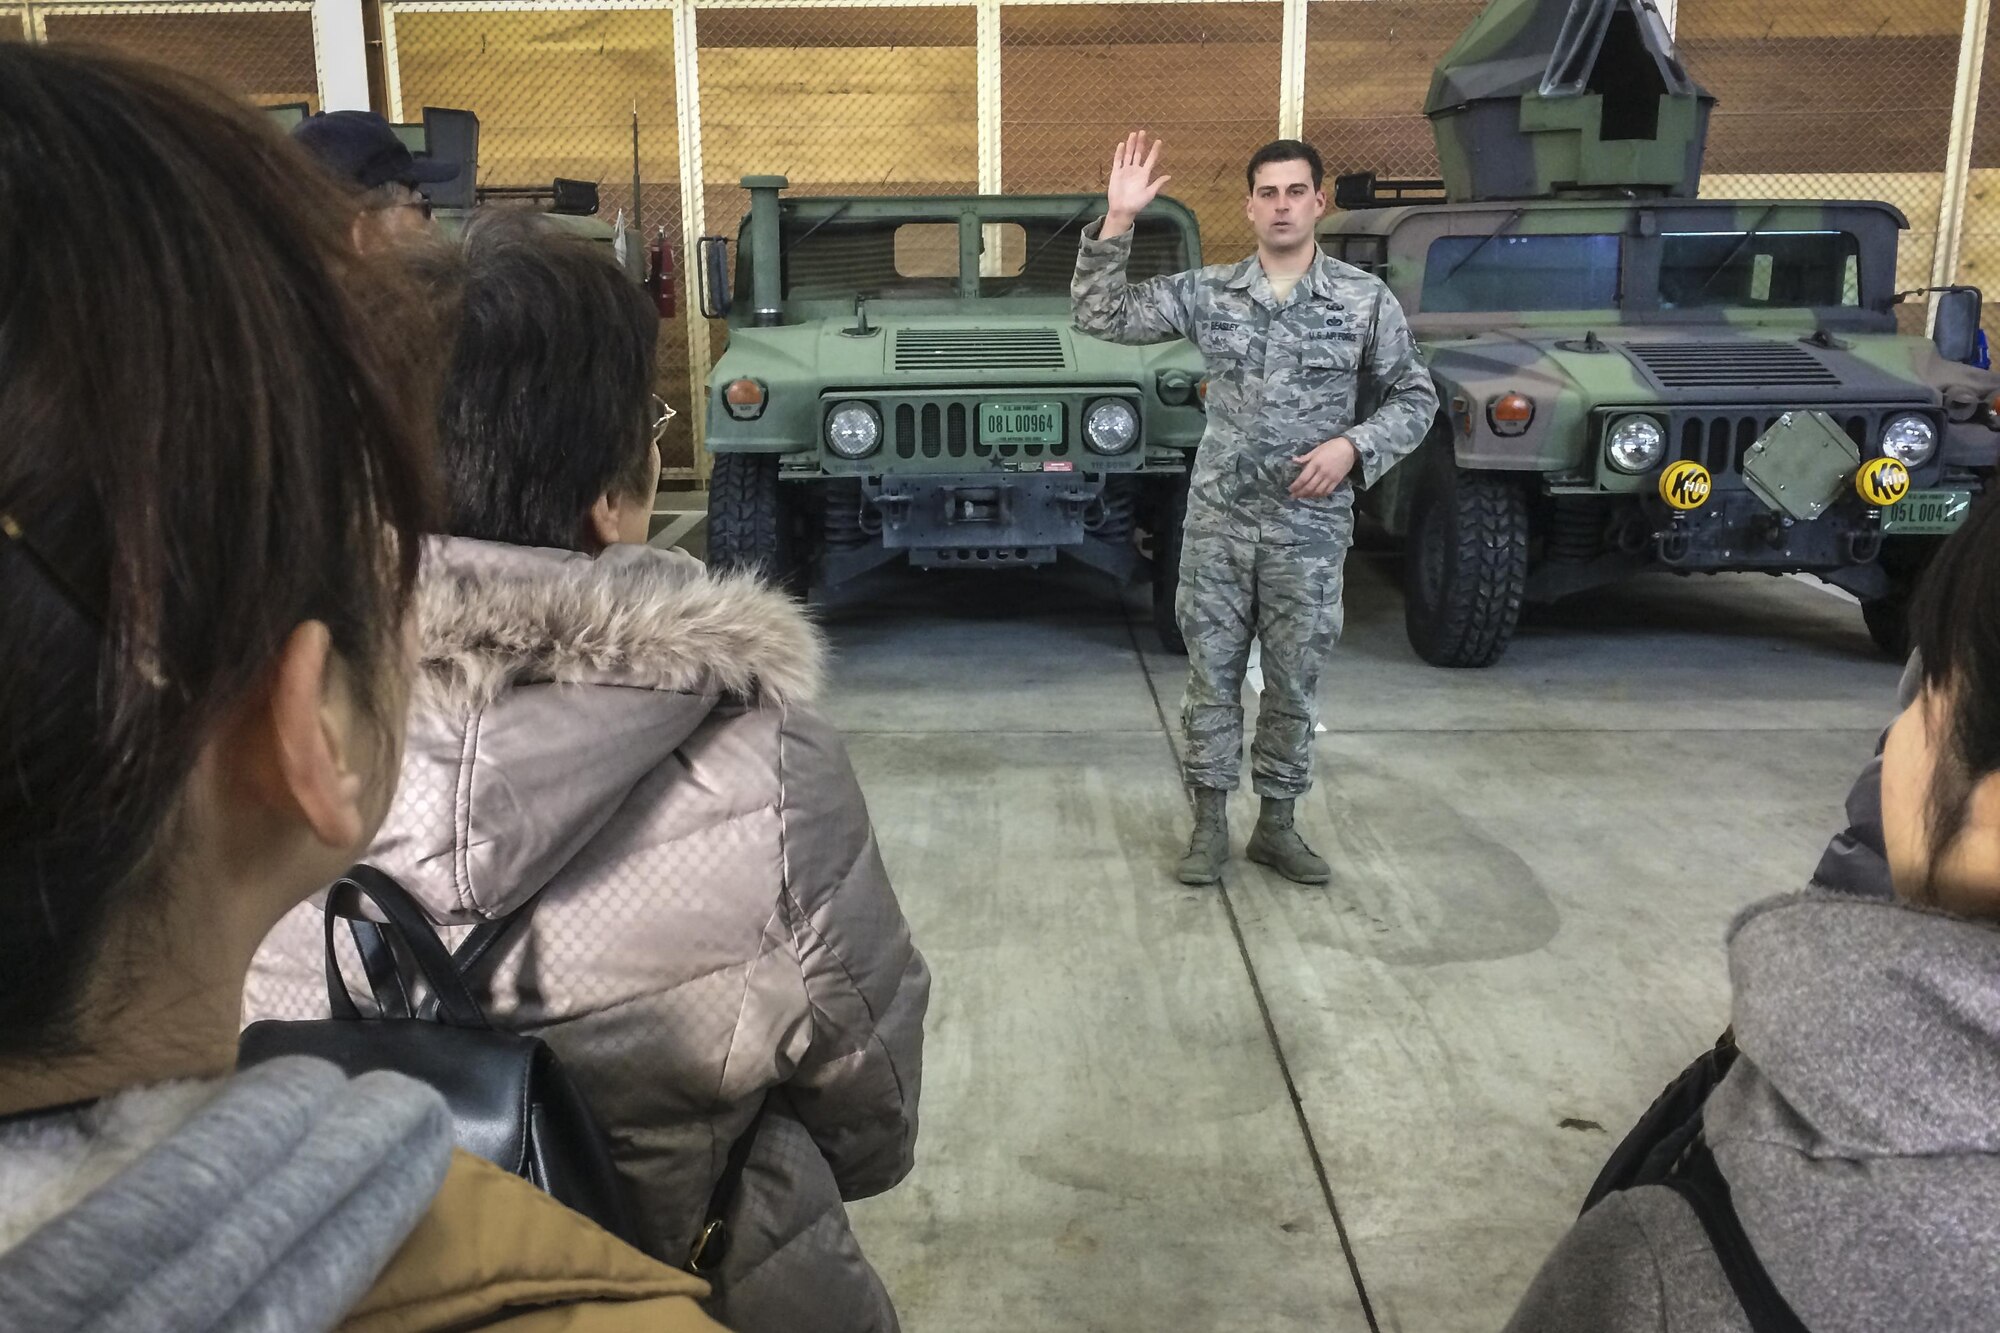 U.S. Air Force Staff Sgt. Justin Beasley, an explosive ordnance disposal technician with the 35th Civil Engineer Squadron, explains how EOD makes use of the M1167 Humvee at home and downrange during a community engagement tour at Misawa Air Base, Japan, Jan. 20, 2017. The M1167 comes equipped with a 6.5-liter turbocharged diesel V-8 engine that nets 190 horsepower and 380 foot-pounds of torque and are protected by armor on all sides of the vehicle. The trucks include special night vision head lights only visible when used with night vision goggles worn on the operator’s helmet. (U.S. Air Force photo by Staff Sgt. Benjamin W. Stratton)